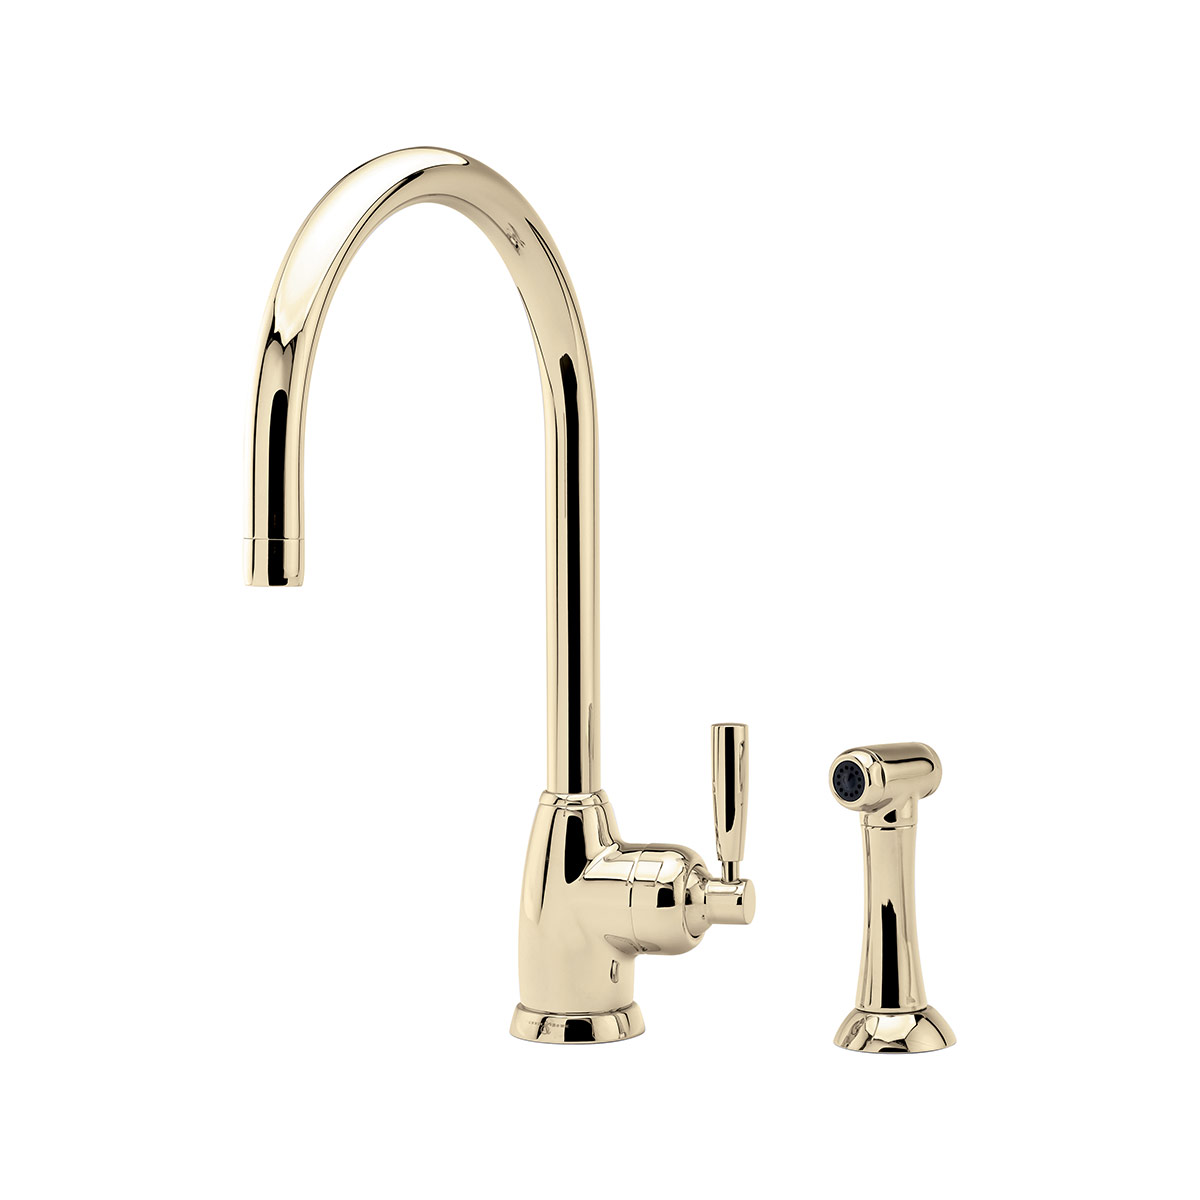 Shaws by Perrin & Rowe Roeburn kitchen mixer with spray rinse in Gold. Mimas style monobloc kitchen tap AUSH.4846. Distributed in Australia by Luxe by Design, Brisbane.